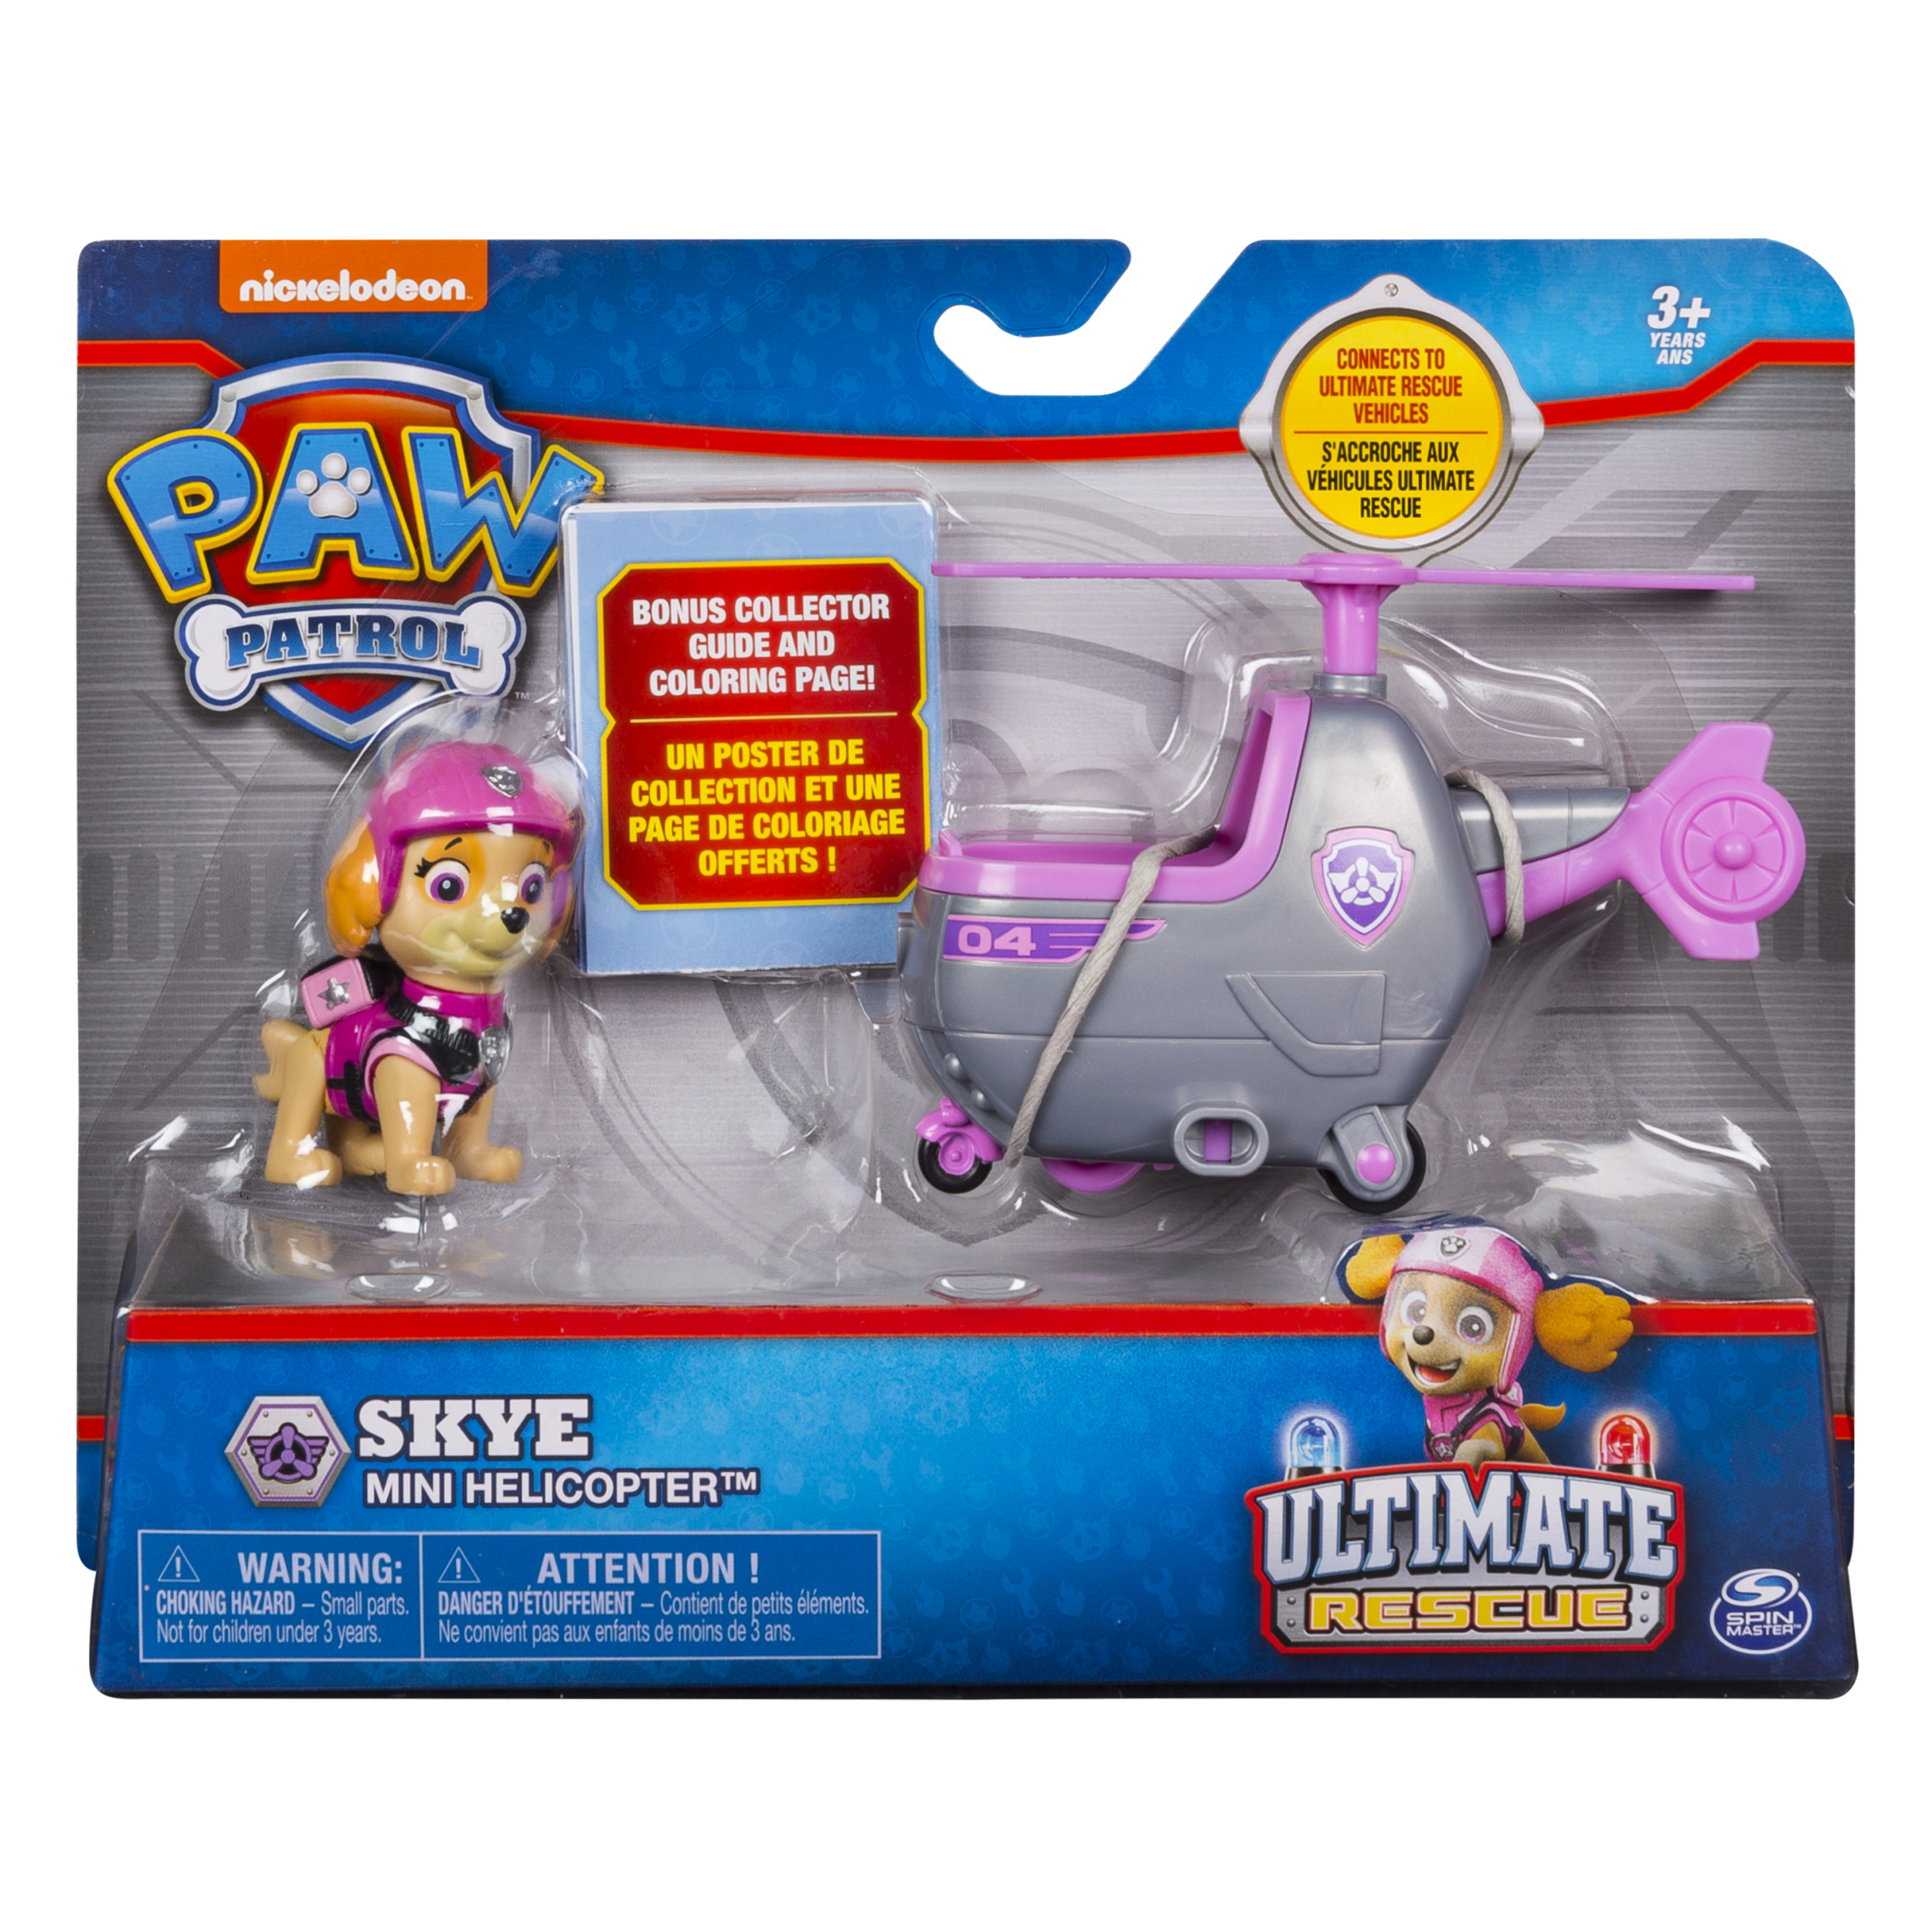 PAW Patrol Ultimate Rescue, Skye’s Mini Helicopter with Collectible Figure, for Ages 3 and Up - image 2 of 6